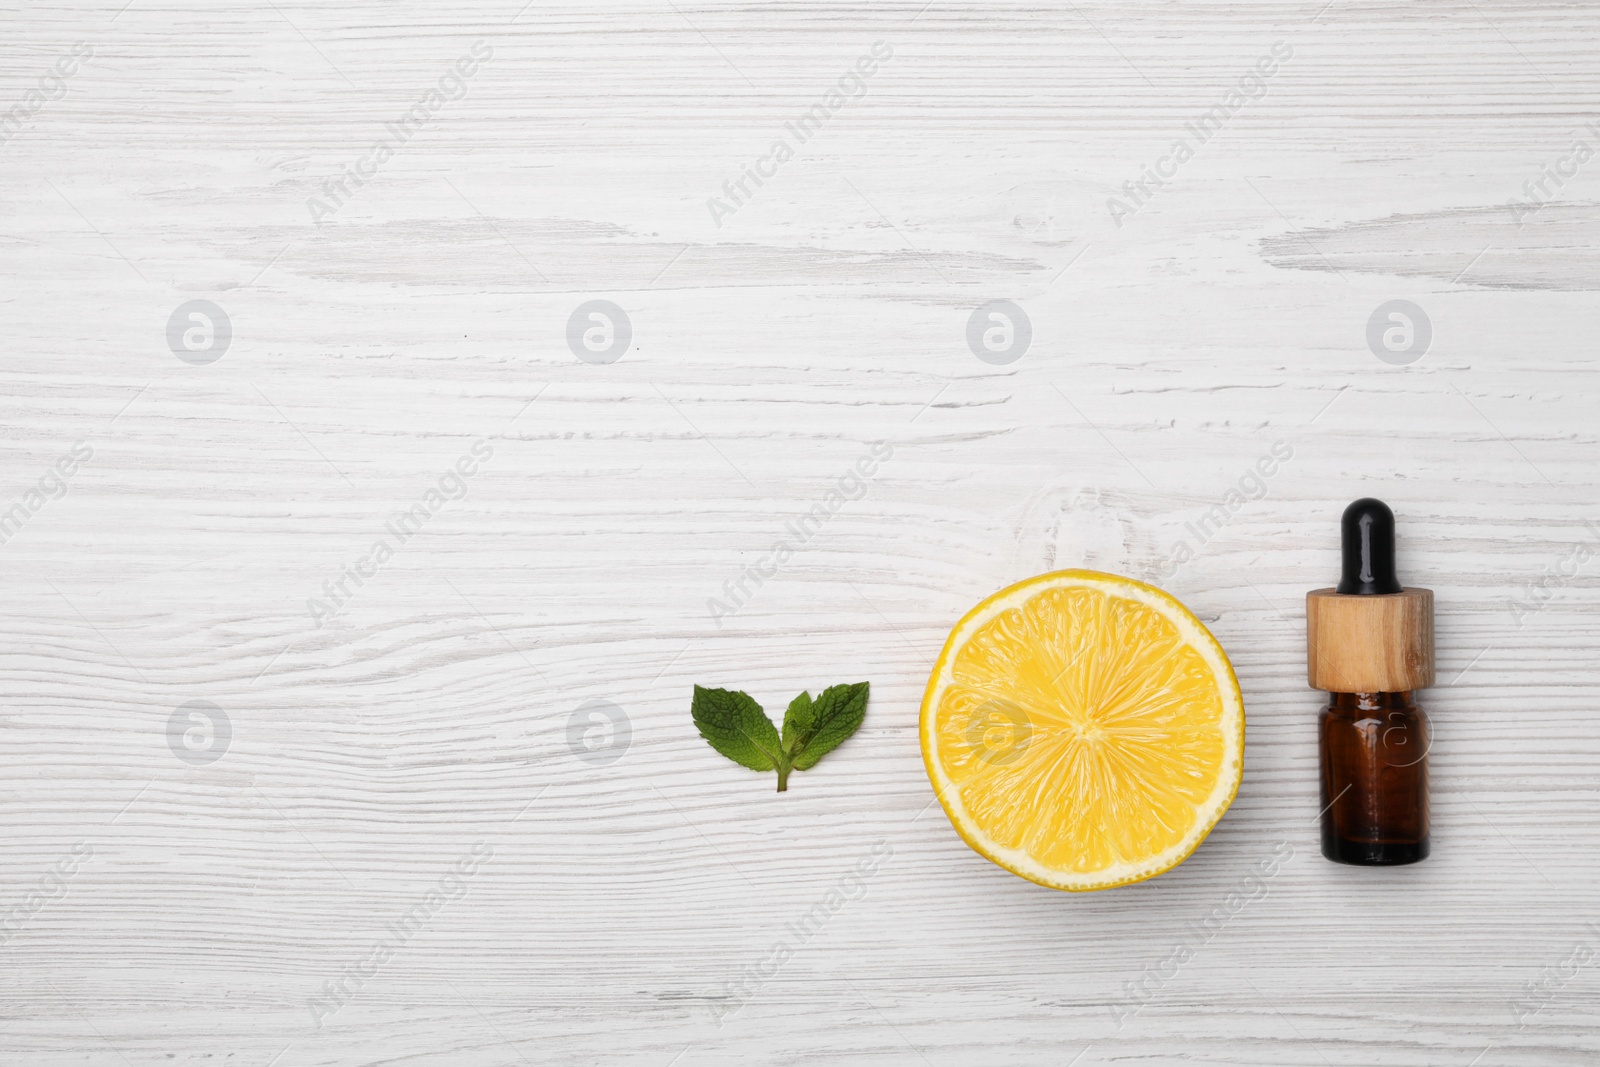 Photo of Bottle of citrus essential oil and fresh lemon on white wooden table, flat lay. Space for text